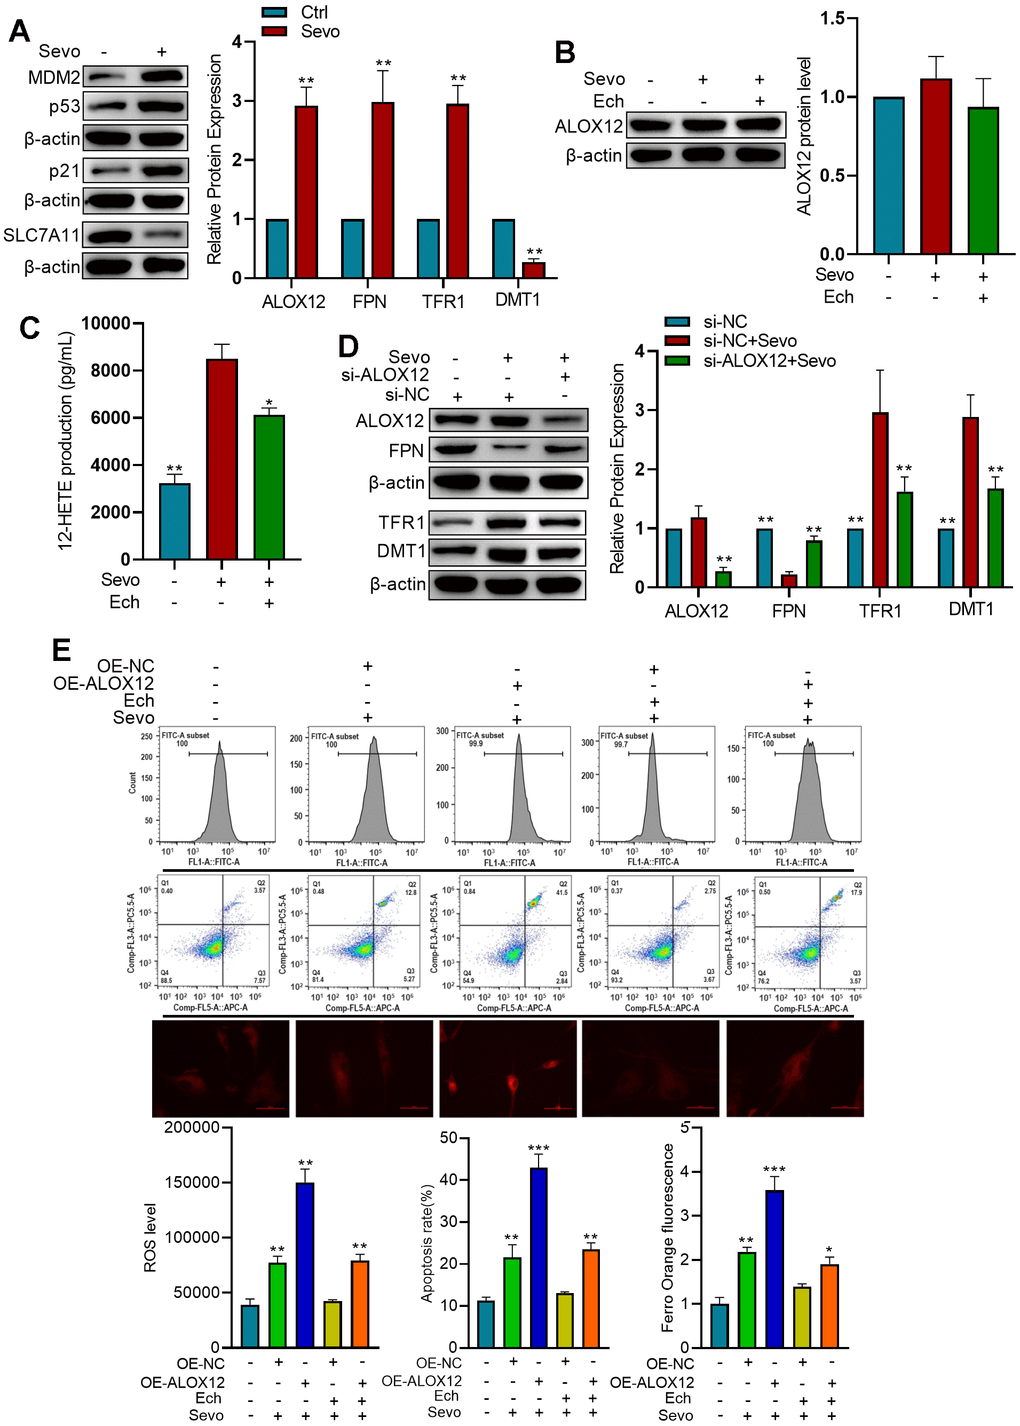 Echinatin inhibits sevoflurane-induced ferroptosis via ALOX12. (A) HT22 cells were exposed to either sevoflurane or control conditions. Protein levels of p53, p21, and SLC7A11 were measured by western blot. Compared with the Ctrl group, **PB) HT22 cells were subjected to Echinatin treatment (40 μM) for a duration of 24 hours, followed by exposure to sevoflurane or control conditions. Protein level of ALOX12 was measured by western blot. (C) ALOX12 activity was measured by detecting 12-HETE levels by ELISA. Compared with the Sevo group, *PD) HT22 cells infected with shRNA-control (si-NC) lentivirus or shRNA-ALOX12 (si-ALOX12) lentivirus, followed by exposure to sevoflurane or control conditions. Protein levels of ALOX12, FPN, TFR1, and DMT1 were measured by western blot. Compared with the Sevo+si-NC group, *PE) HT22 cells were infected with lentiviruses carrying either the overexpression control (OE-NC) or ALOX12 overexpression (OE-ALOX12) constructs, and subsequently subjected to Echinatin treatment (40 μM) followed by exposure to sevoflurane. Cell apoptosis and ROS levels were measured using flow cytometry. Intracellular Fe2+ detected by FerroOrange. Compared with indicated group, **P